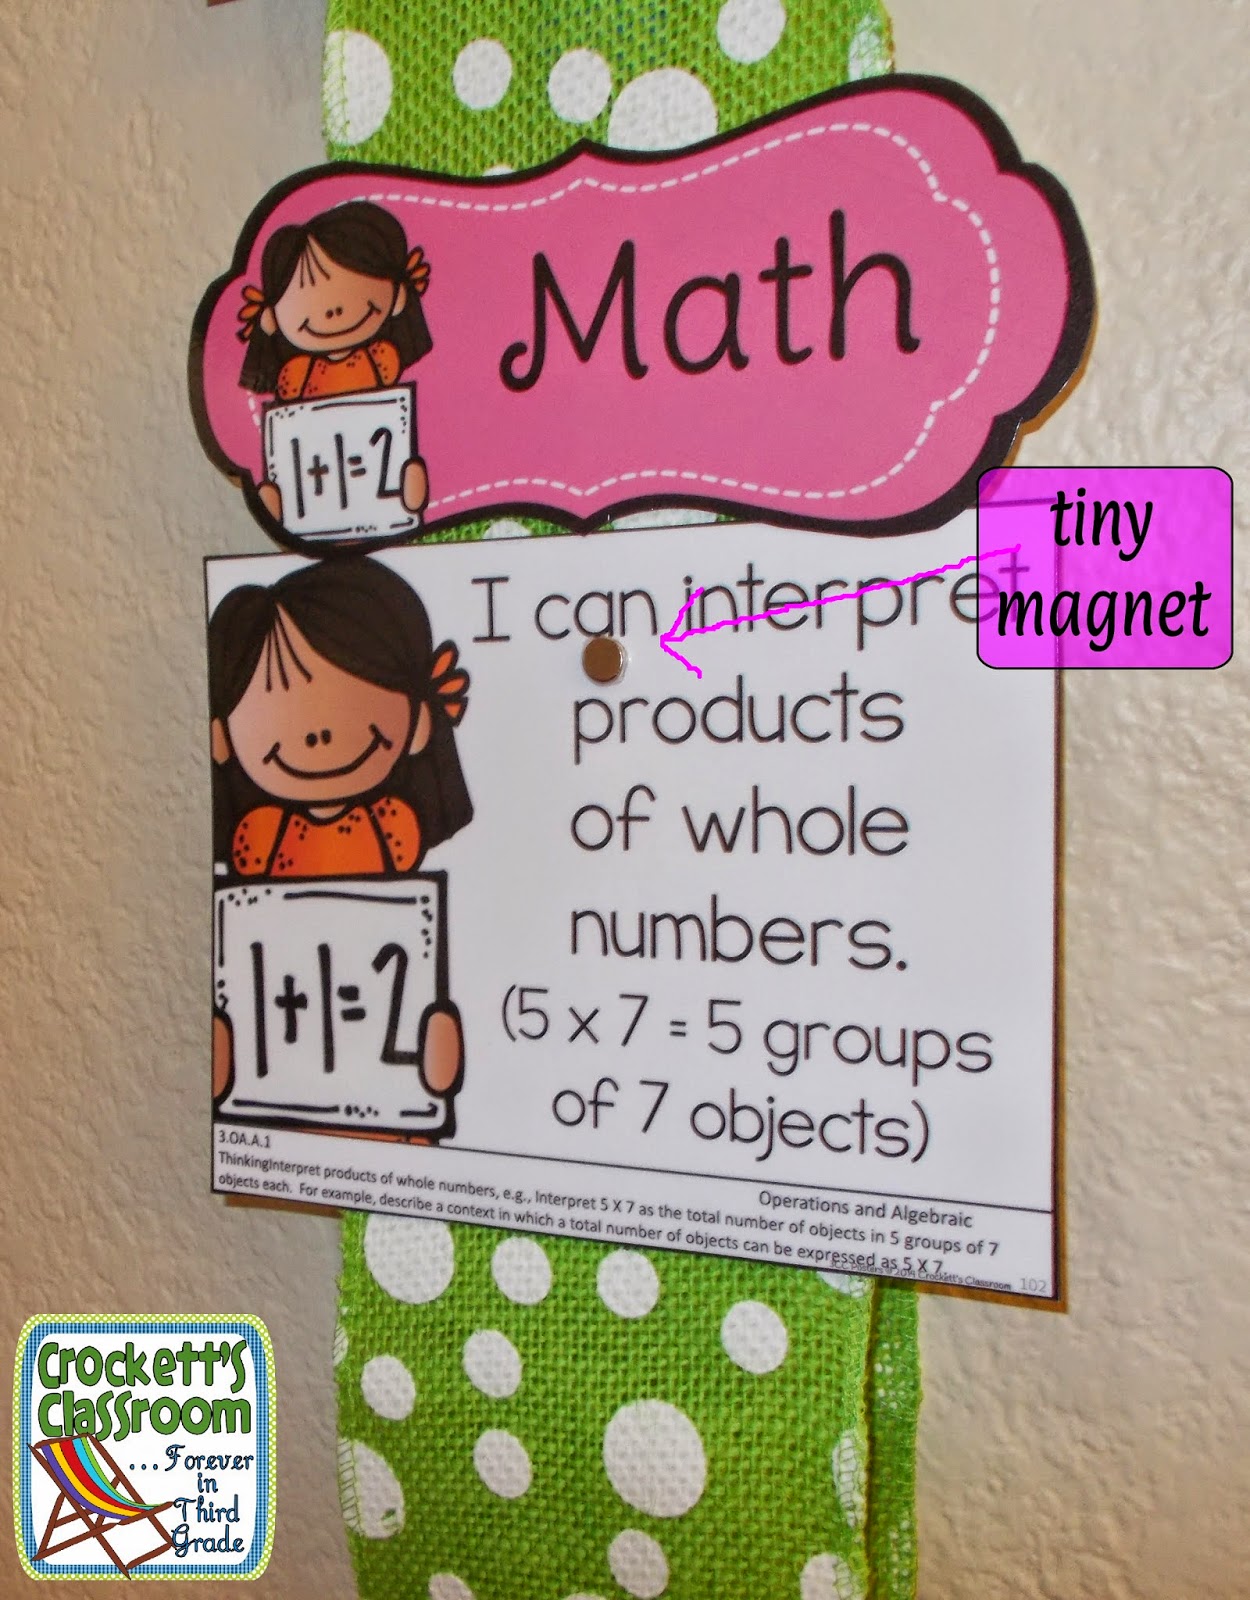 Tiny magnet holds small signs in a display--Crockett's Classroom